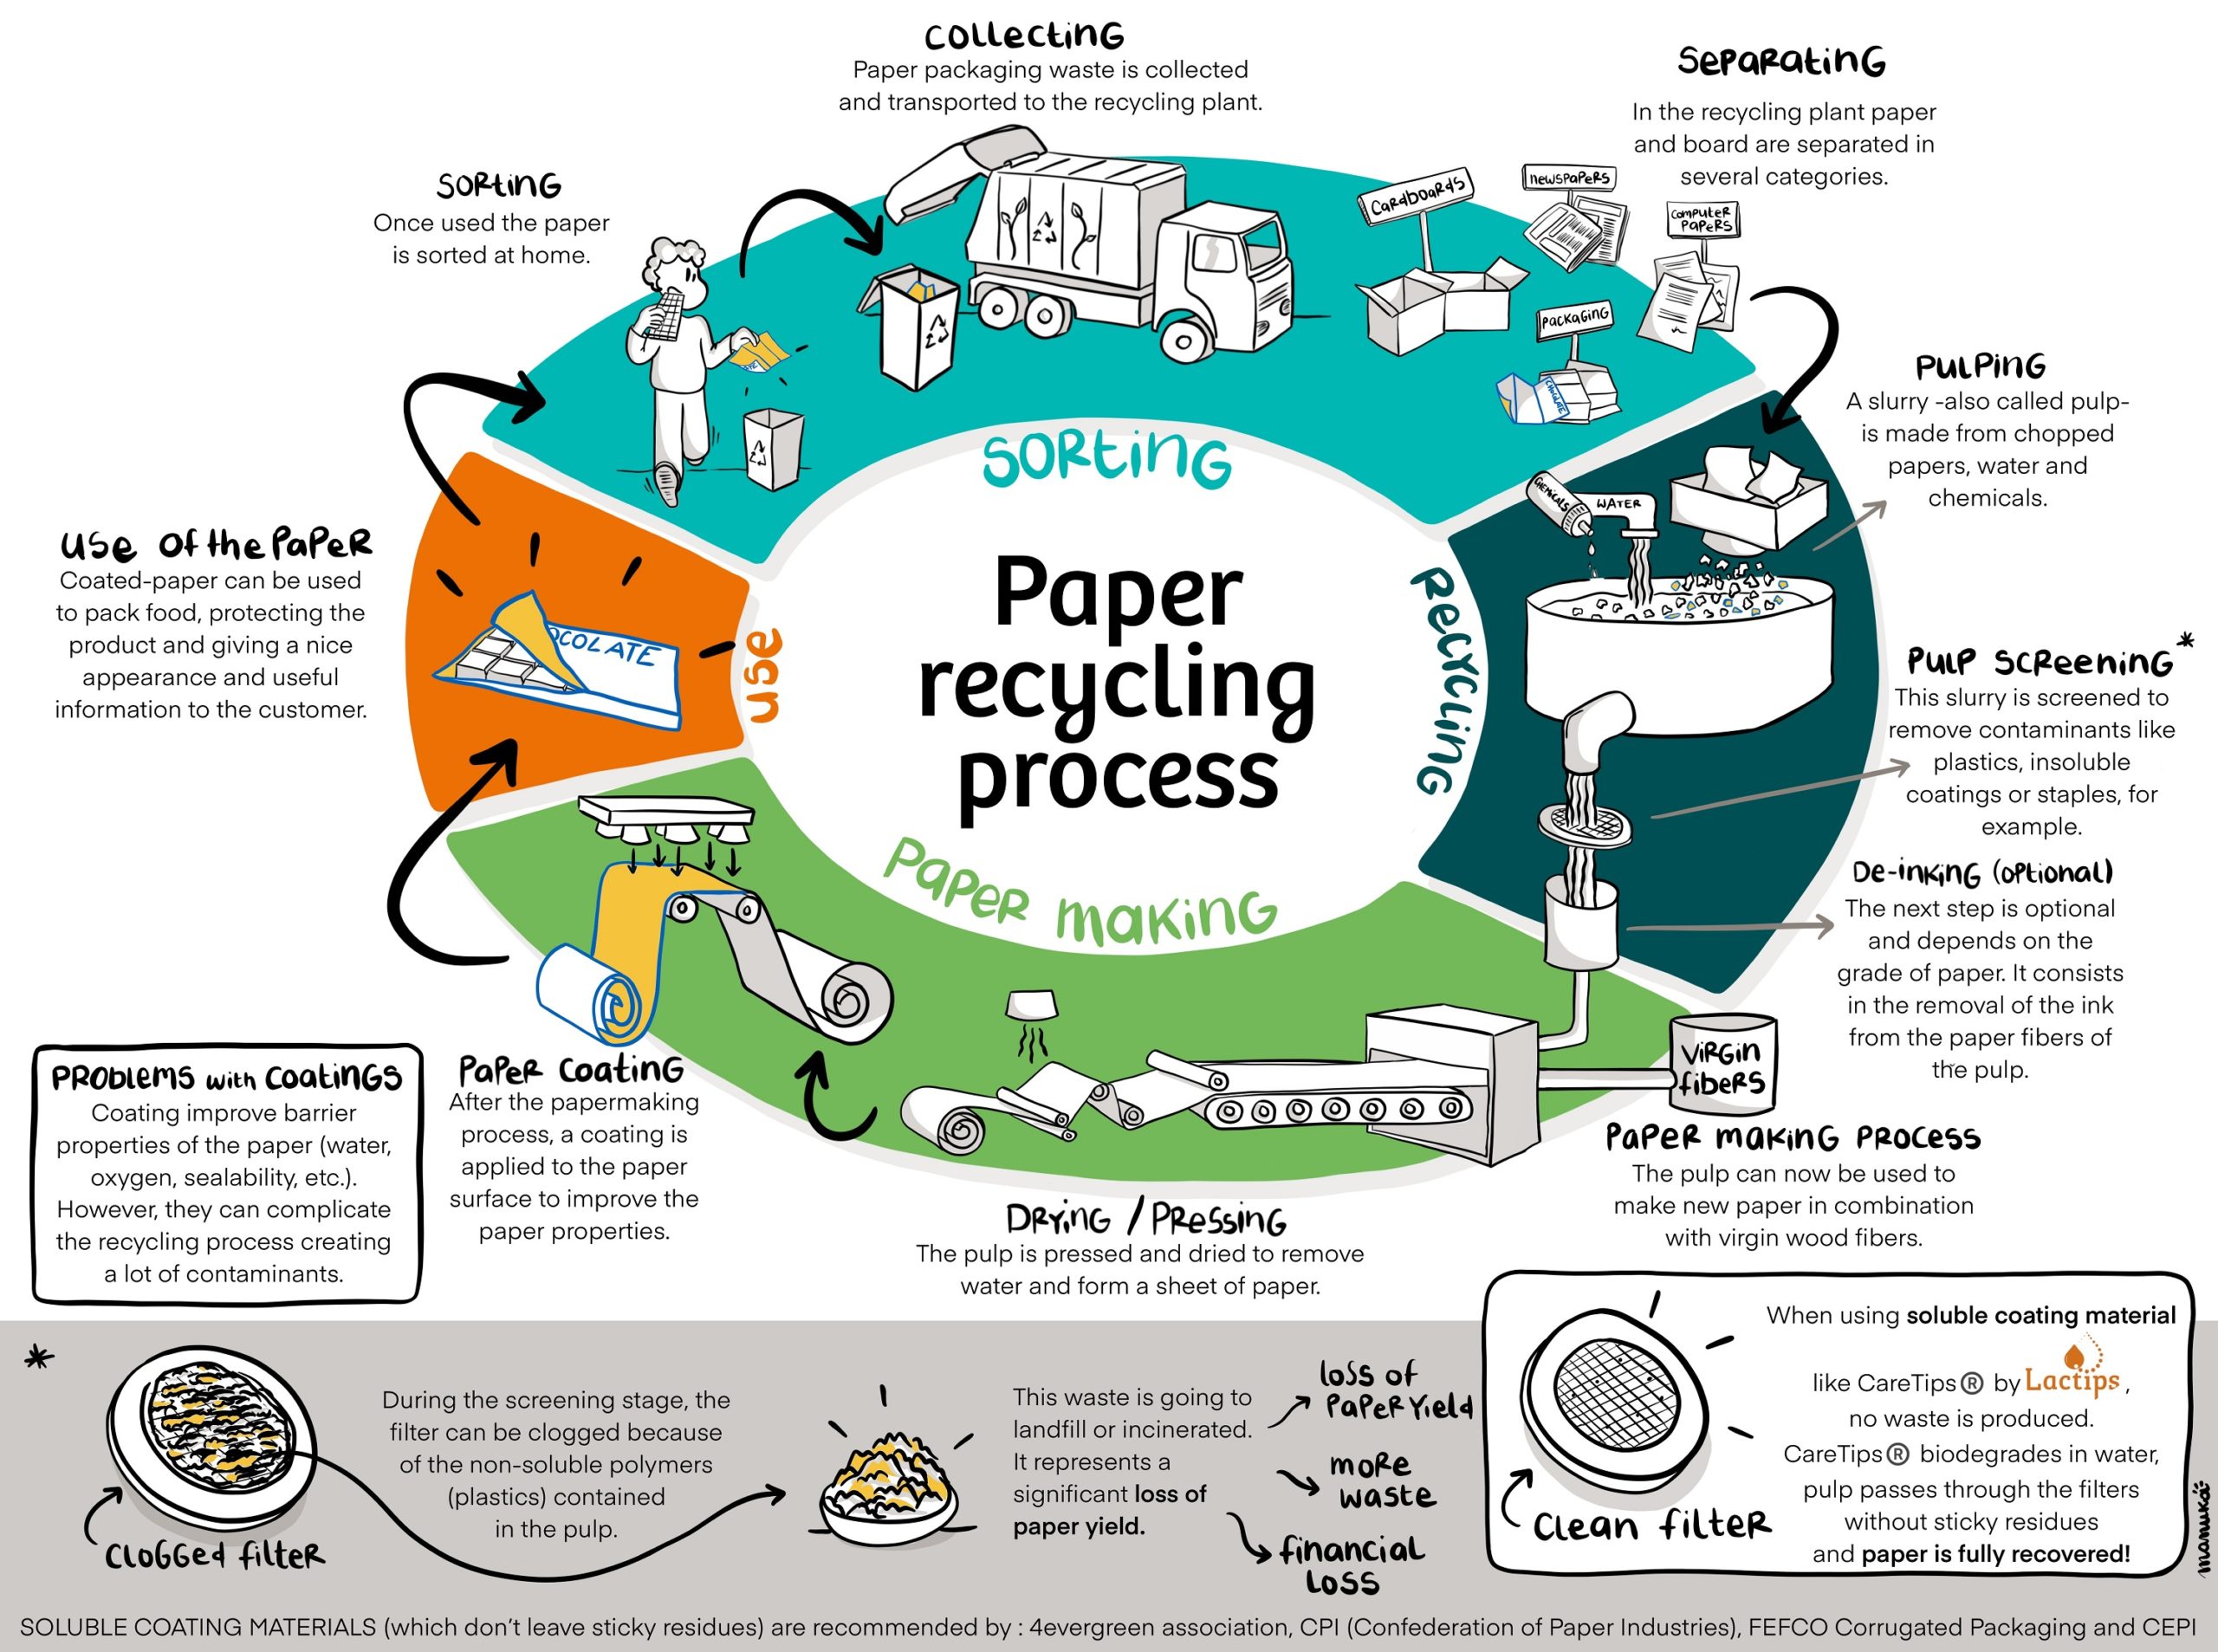 paper recycling research paper